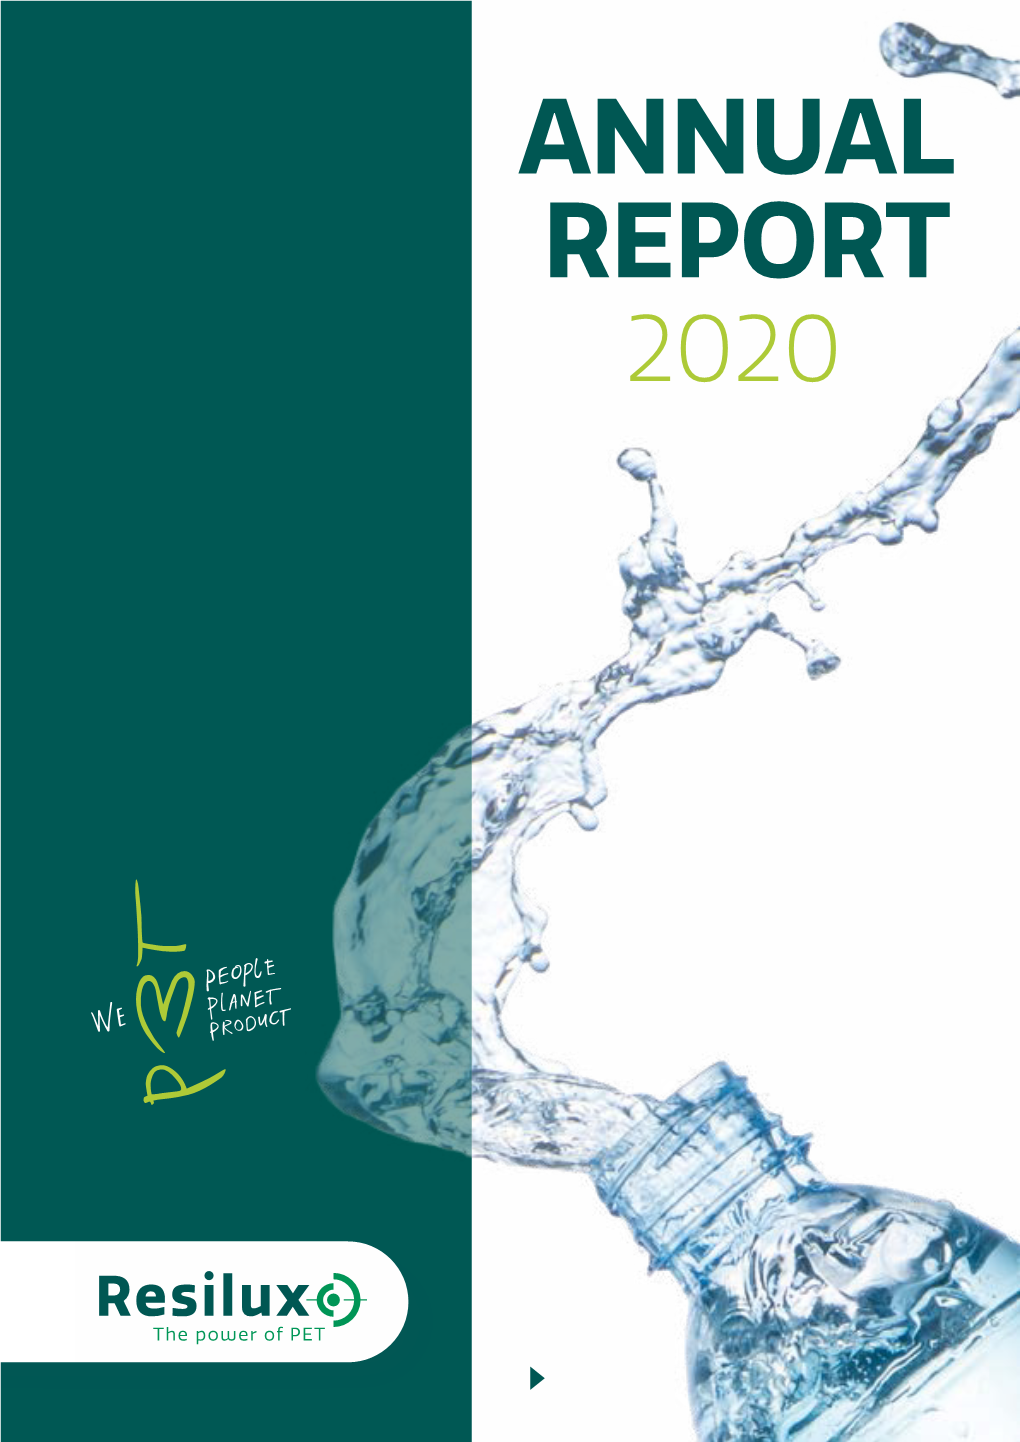 ANNUAL REPORT 2020 Resilux Story